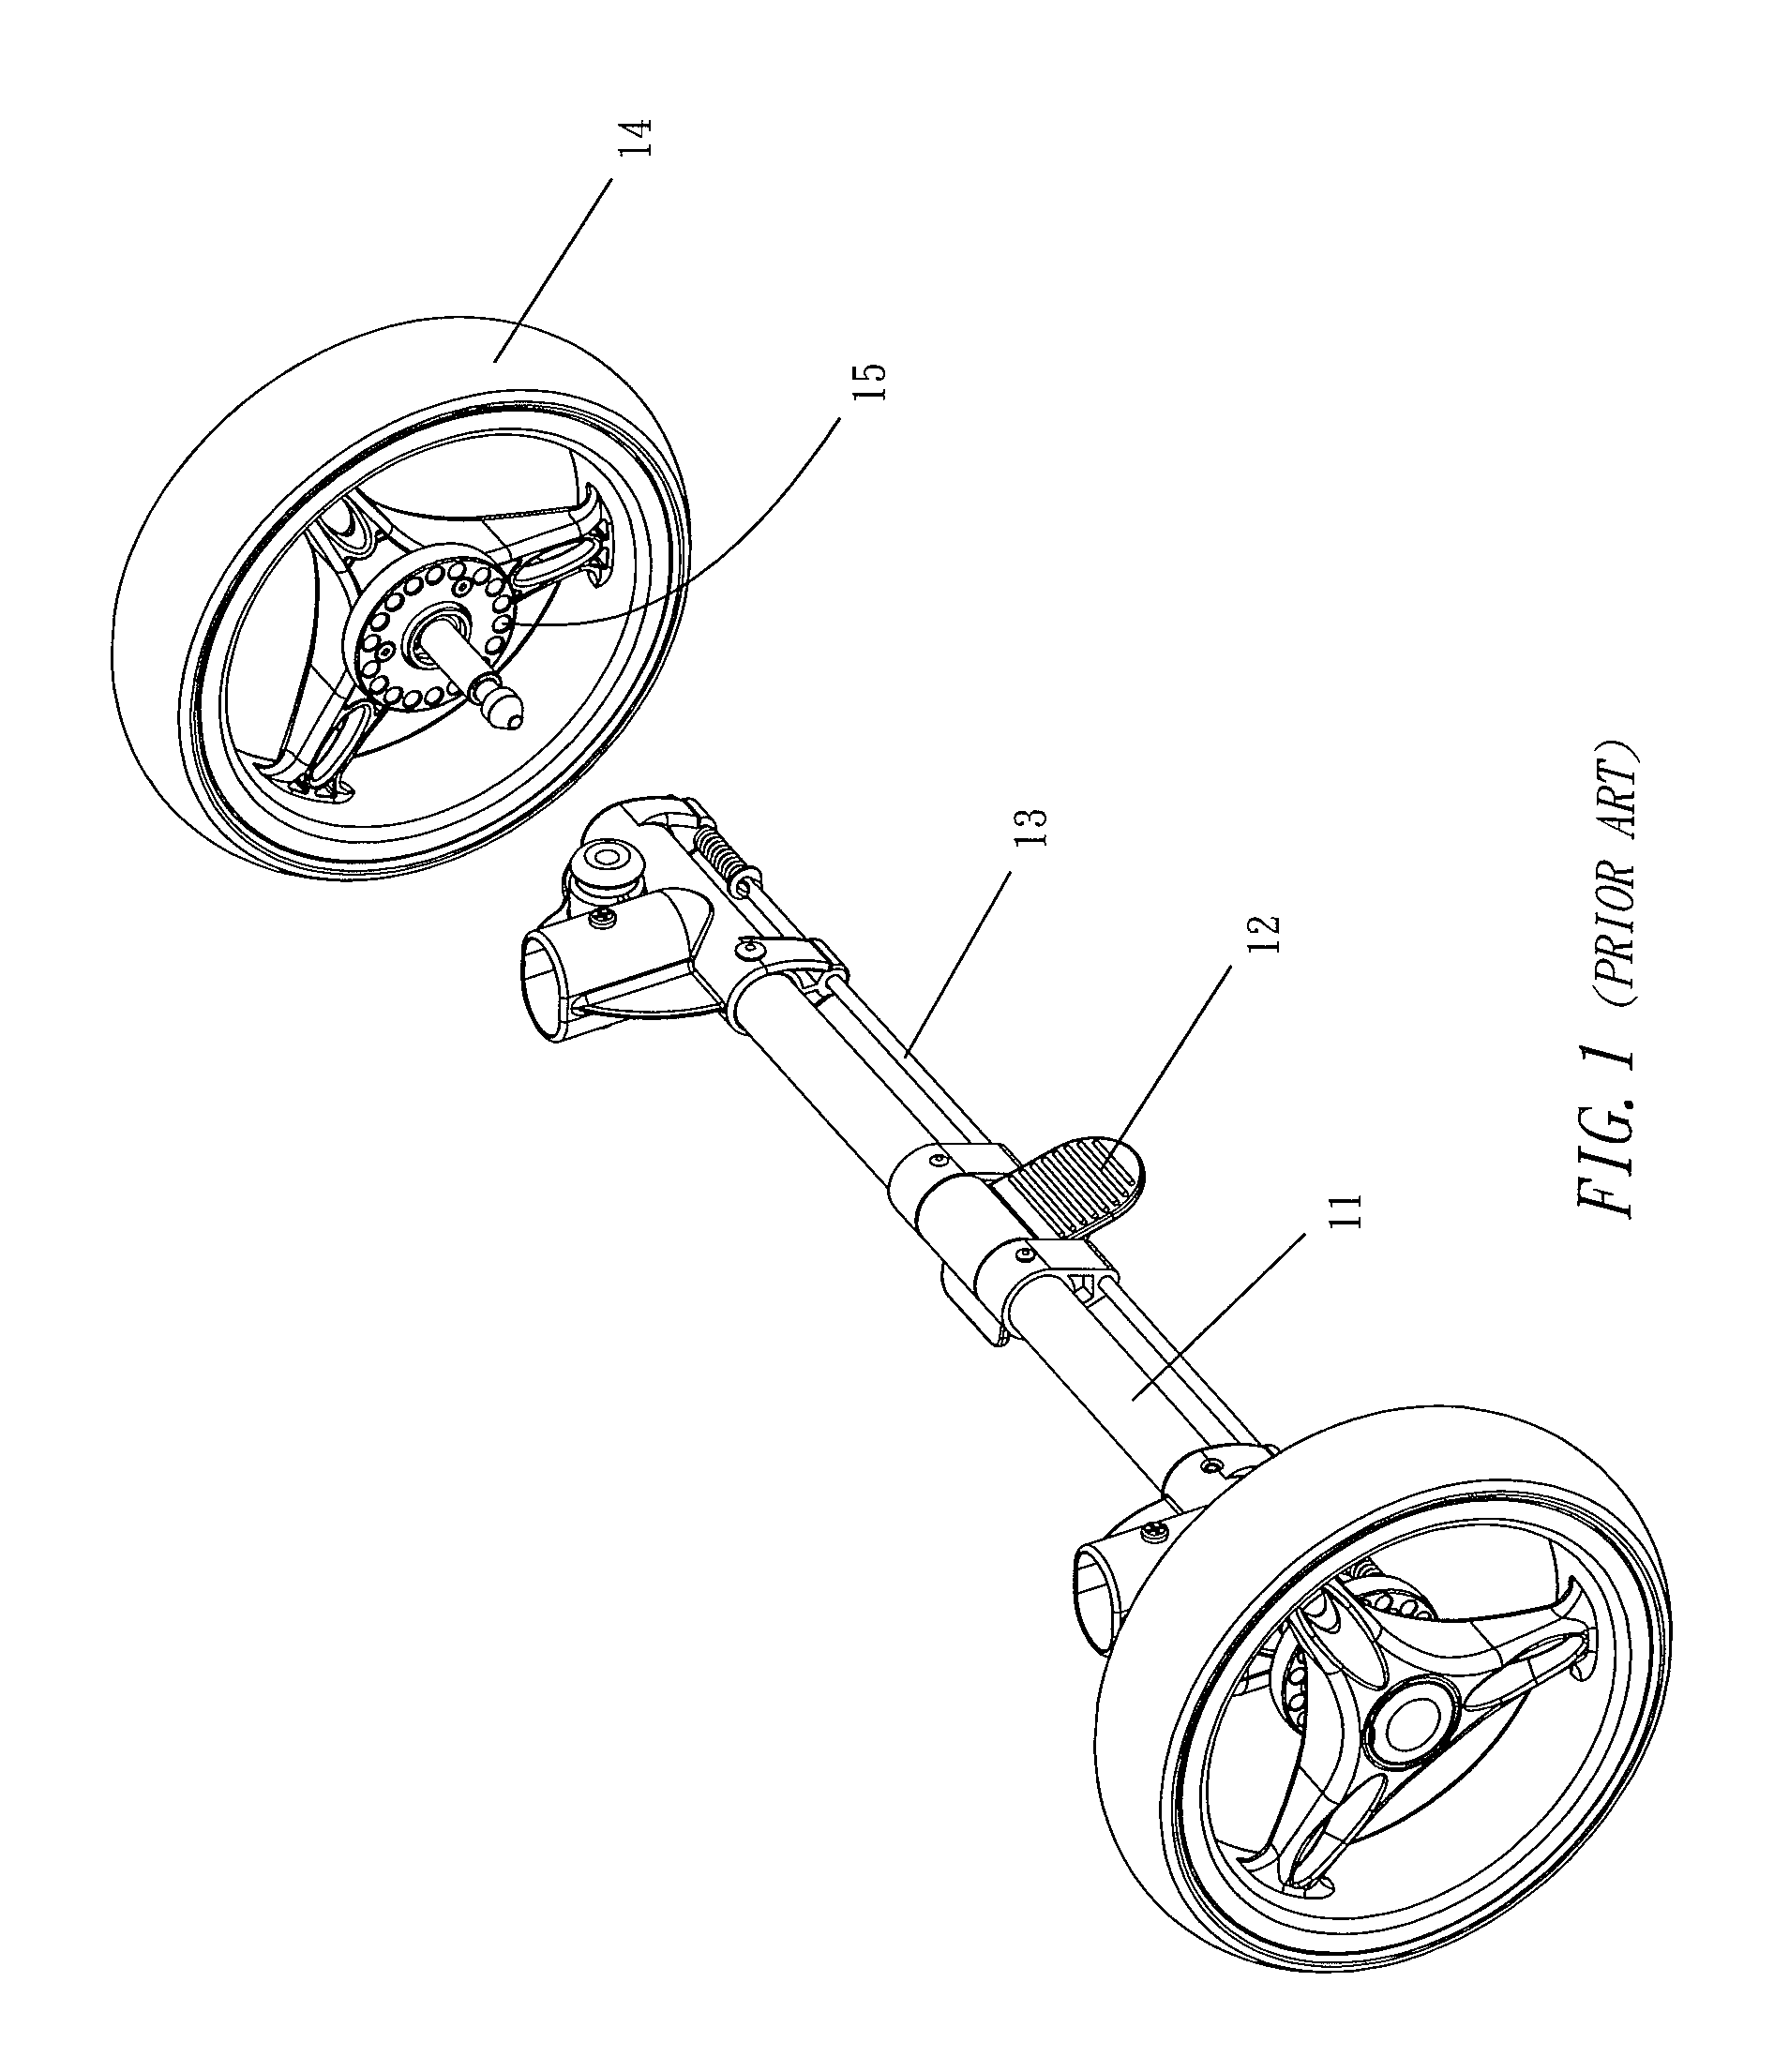 Brake Apparatus For The Cart With Three or More Wheels Such as Golf Bag Carts, Baby Strollers And The Like